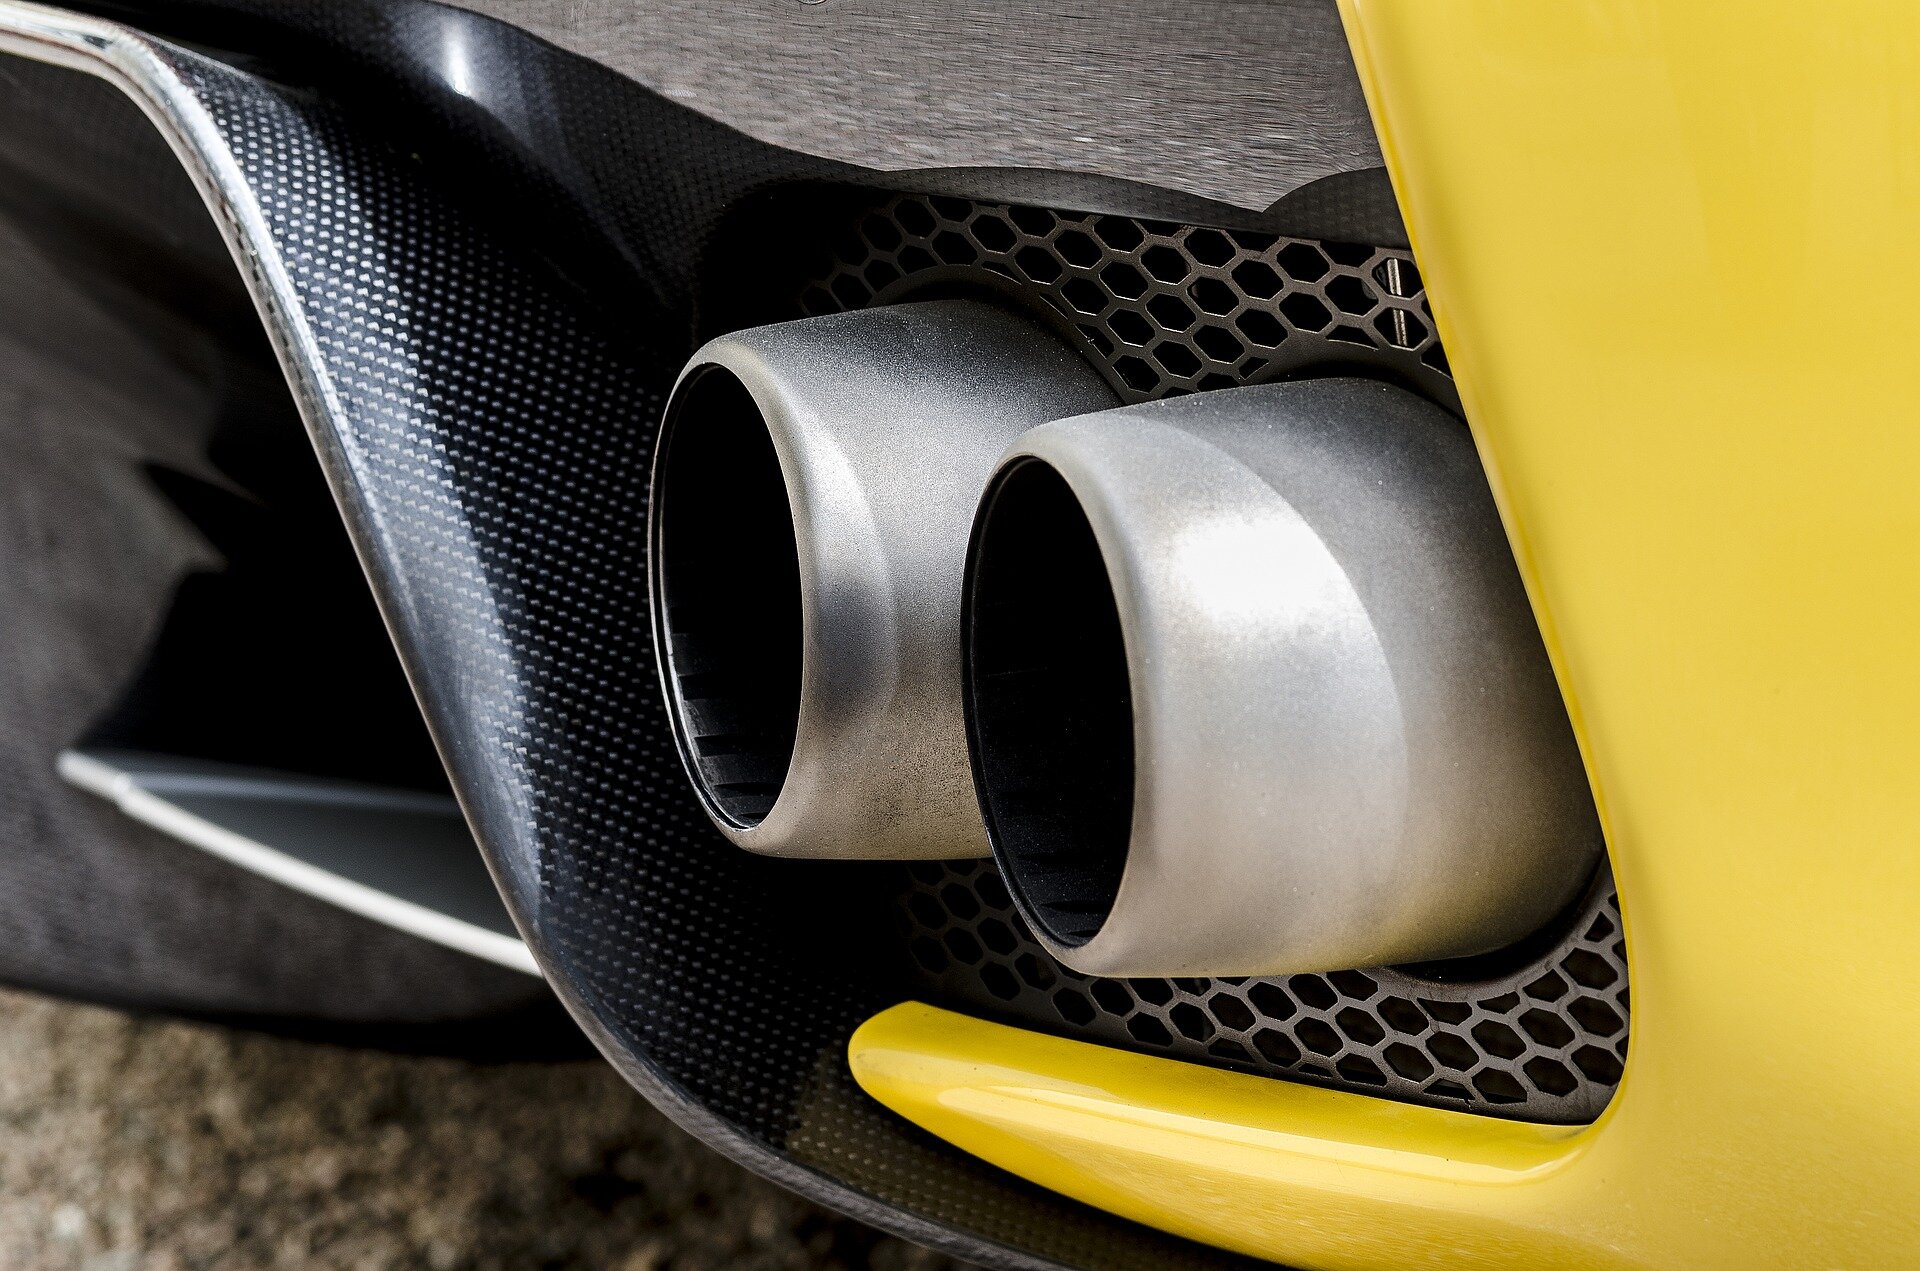 #EPA’s new auto emissions standard will speed the transition to cleaner cars